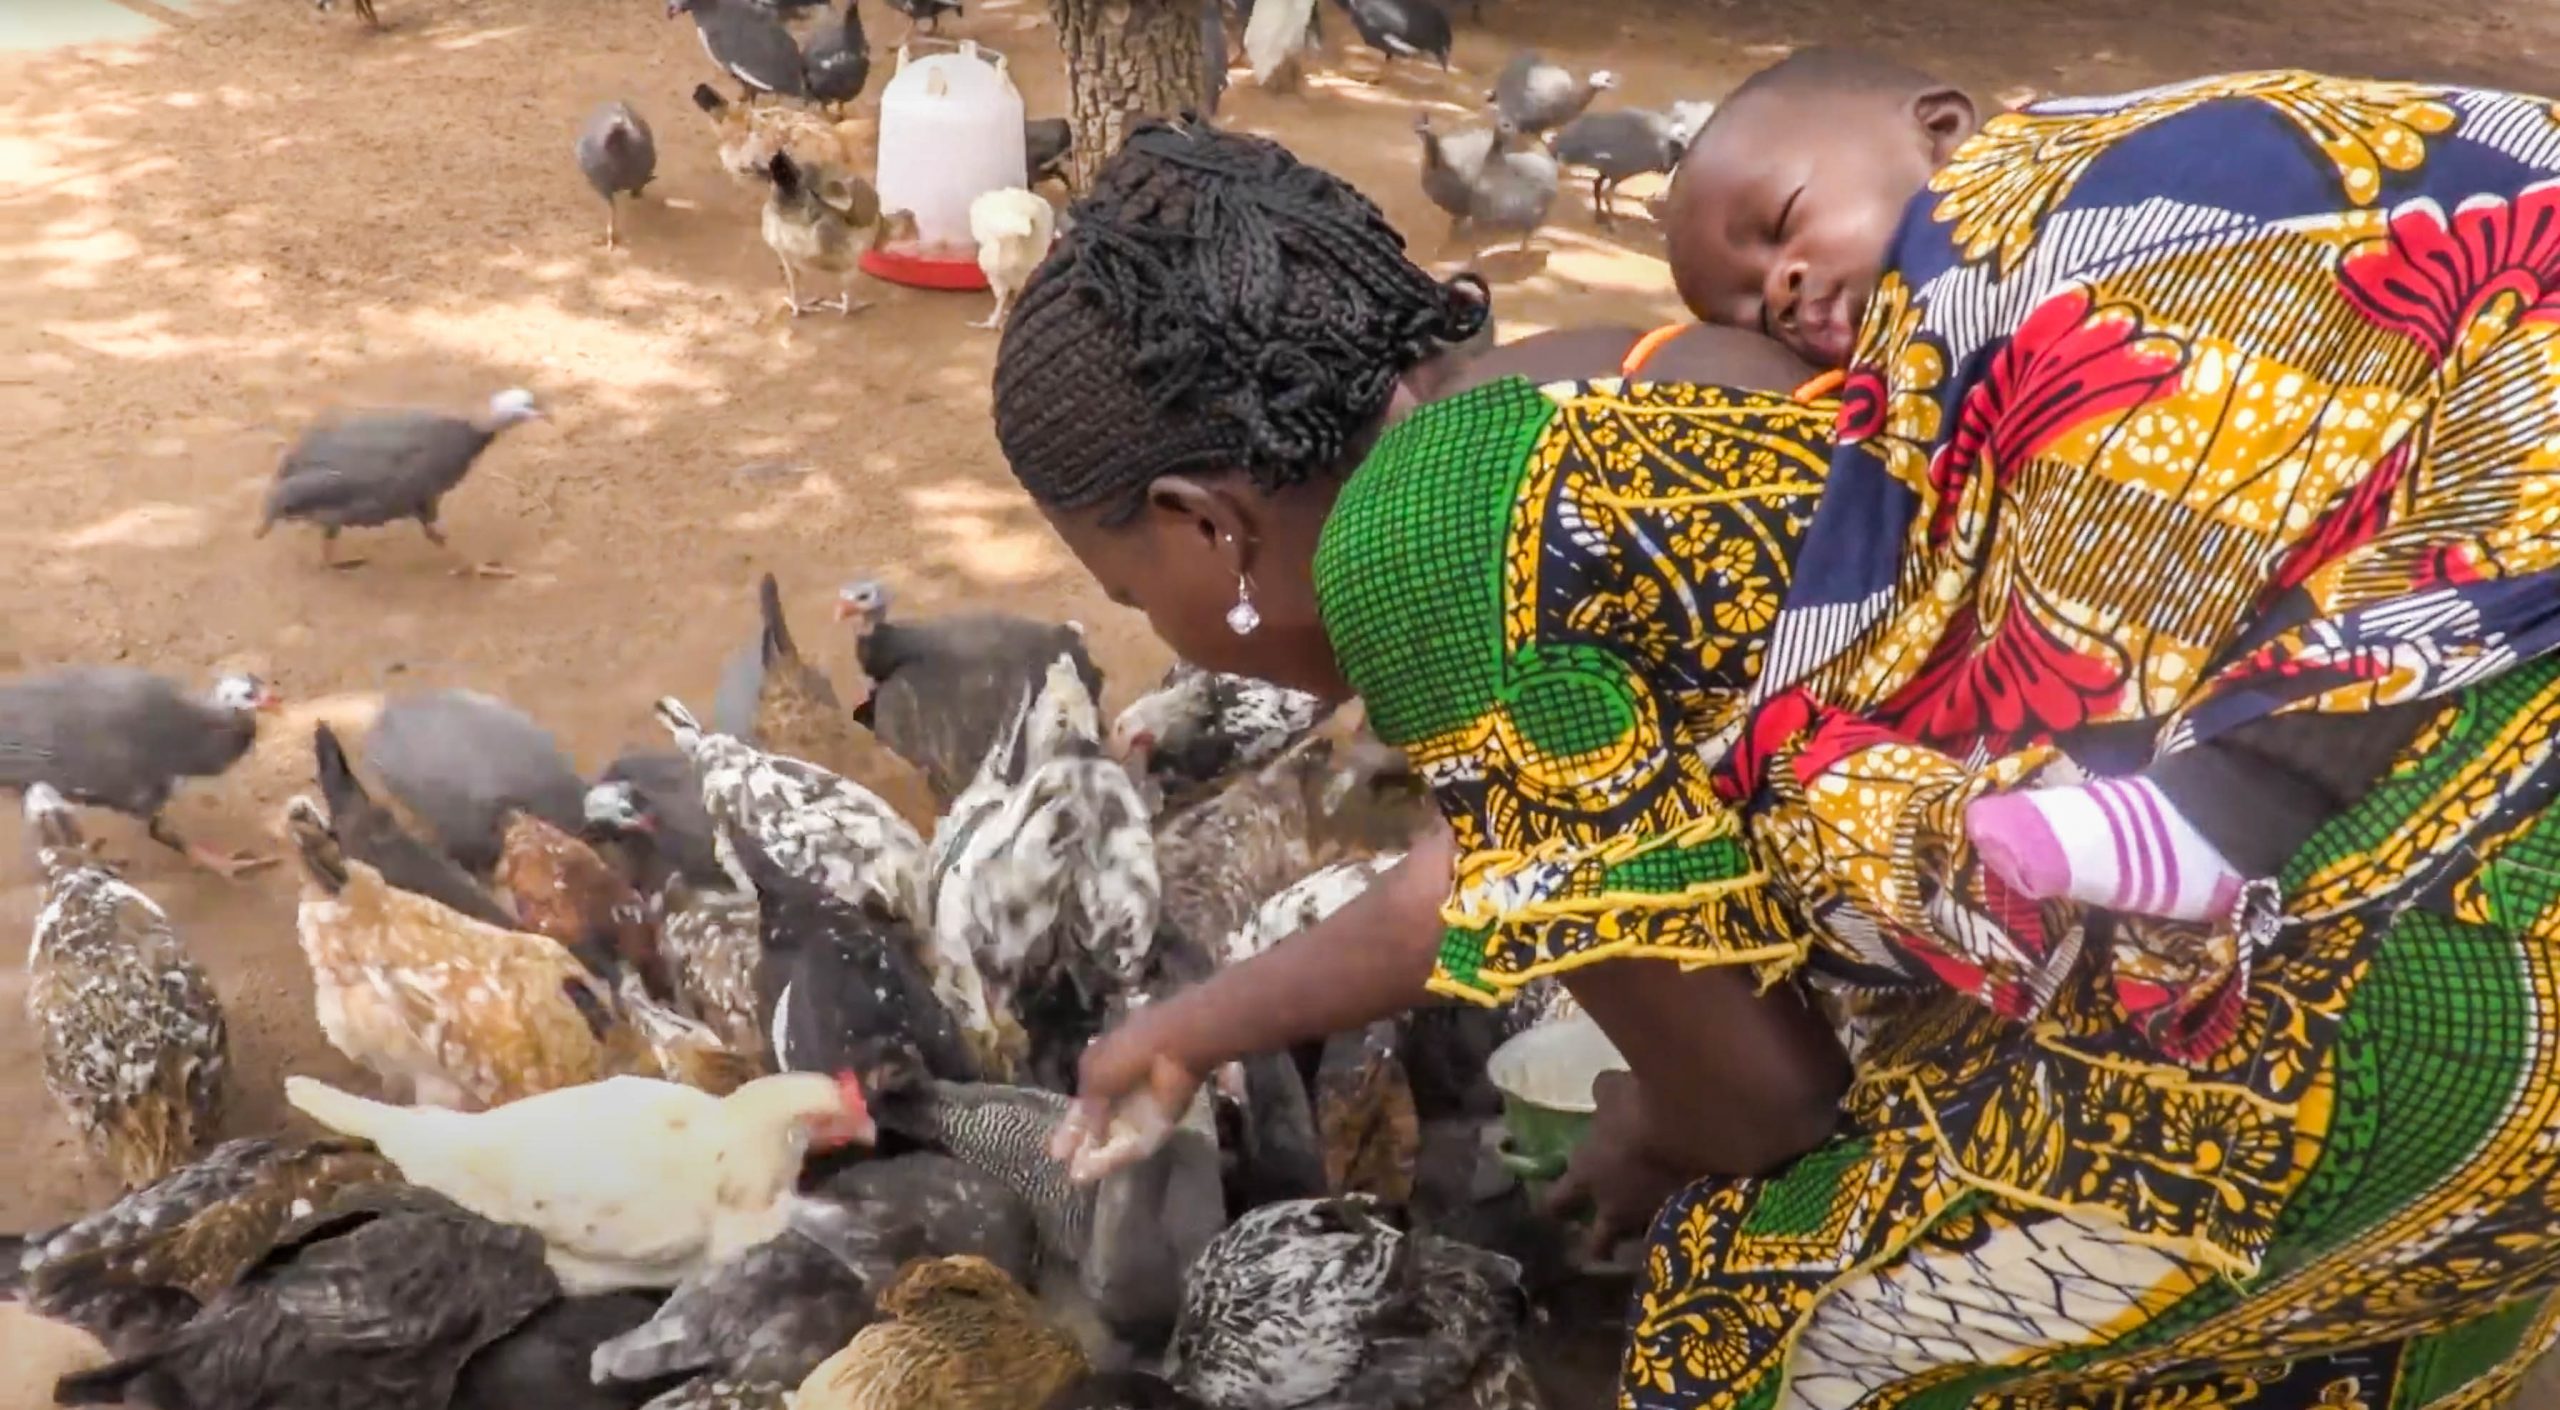 A woman feeds chickens while carrying a child on her back.